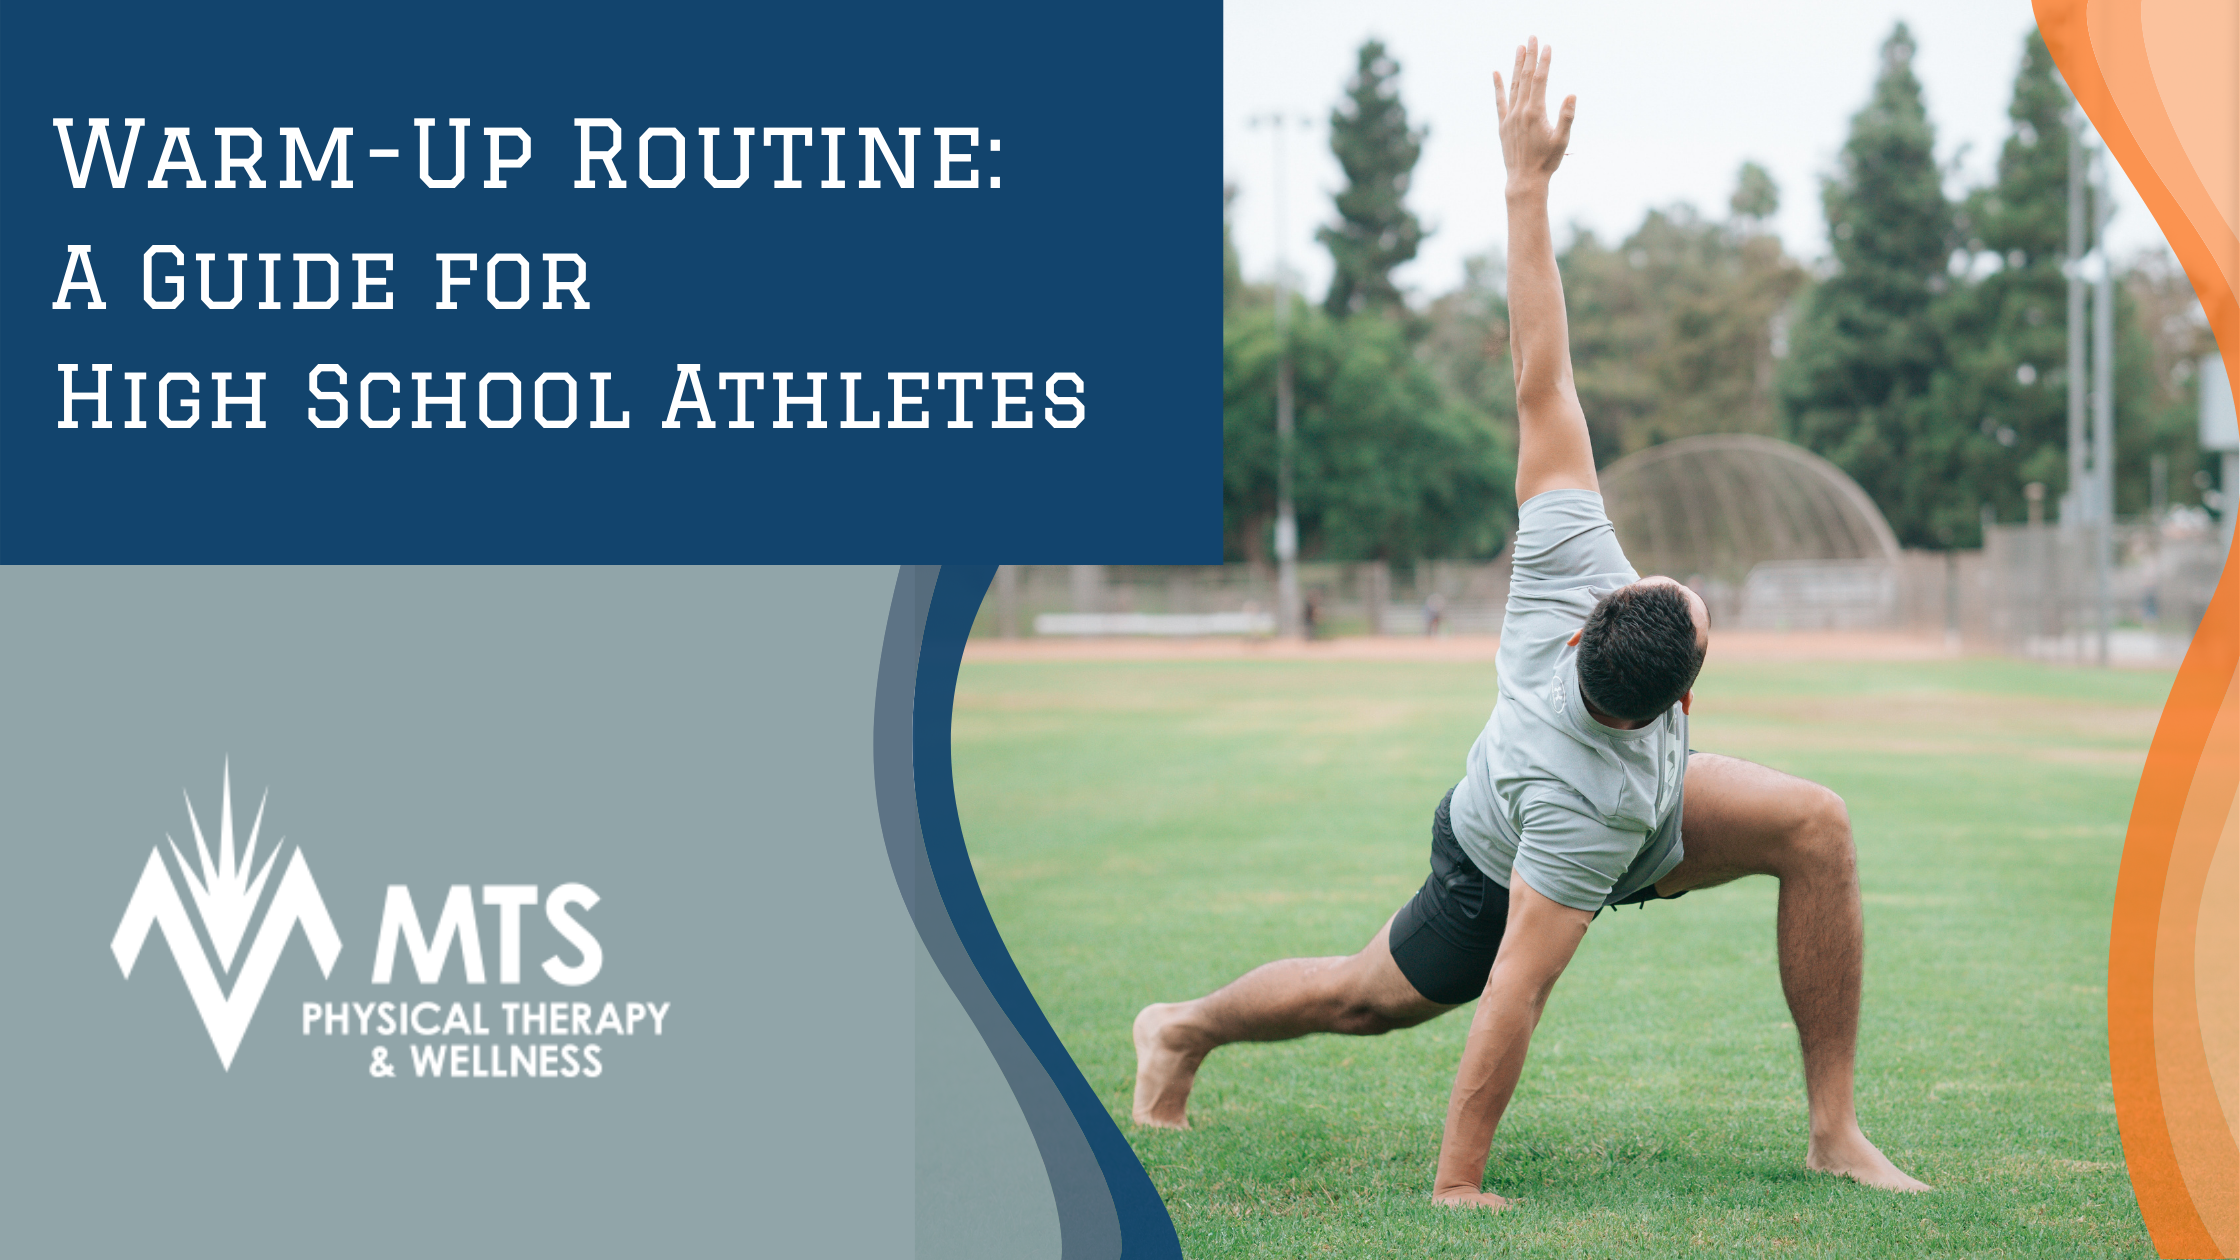 Warm-Up Routine: A Guide for High School Athletes